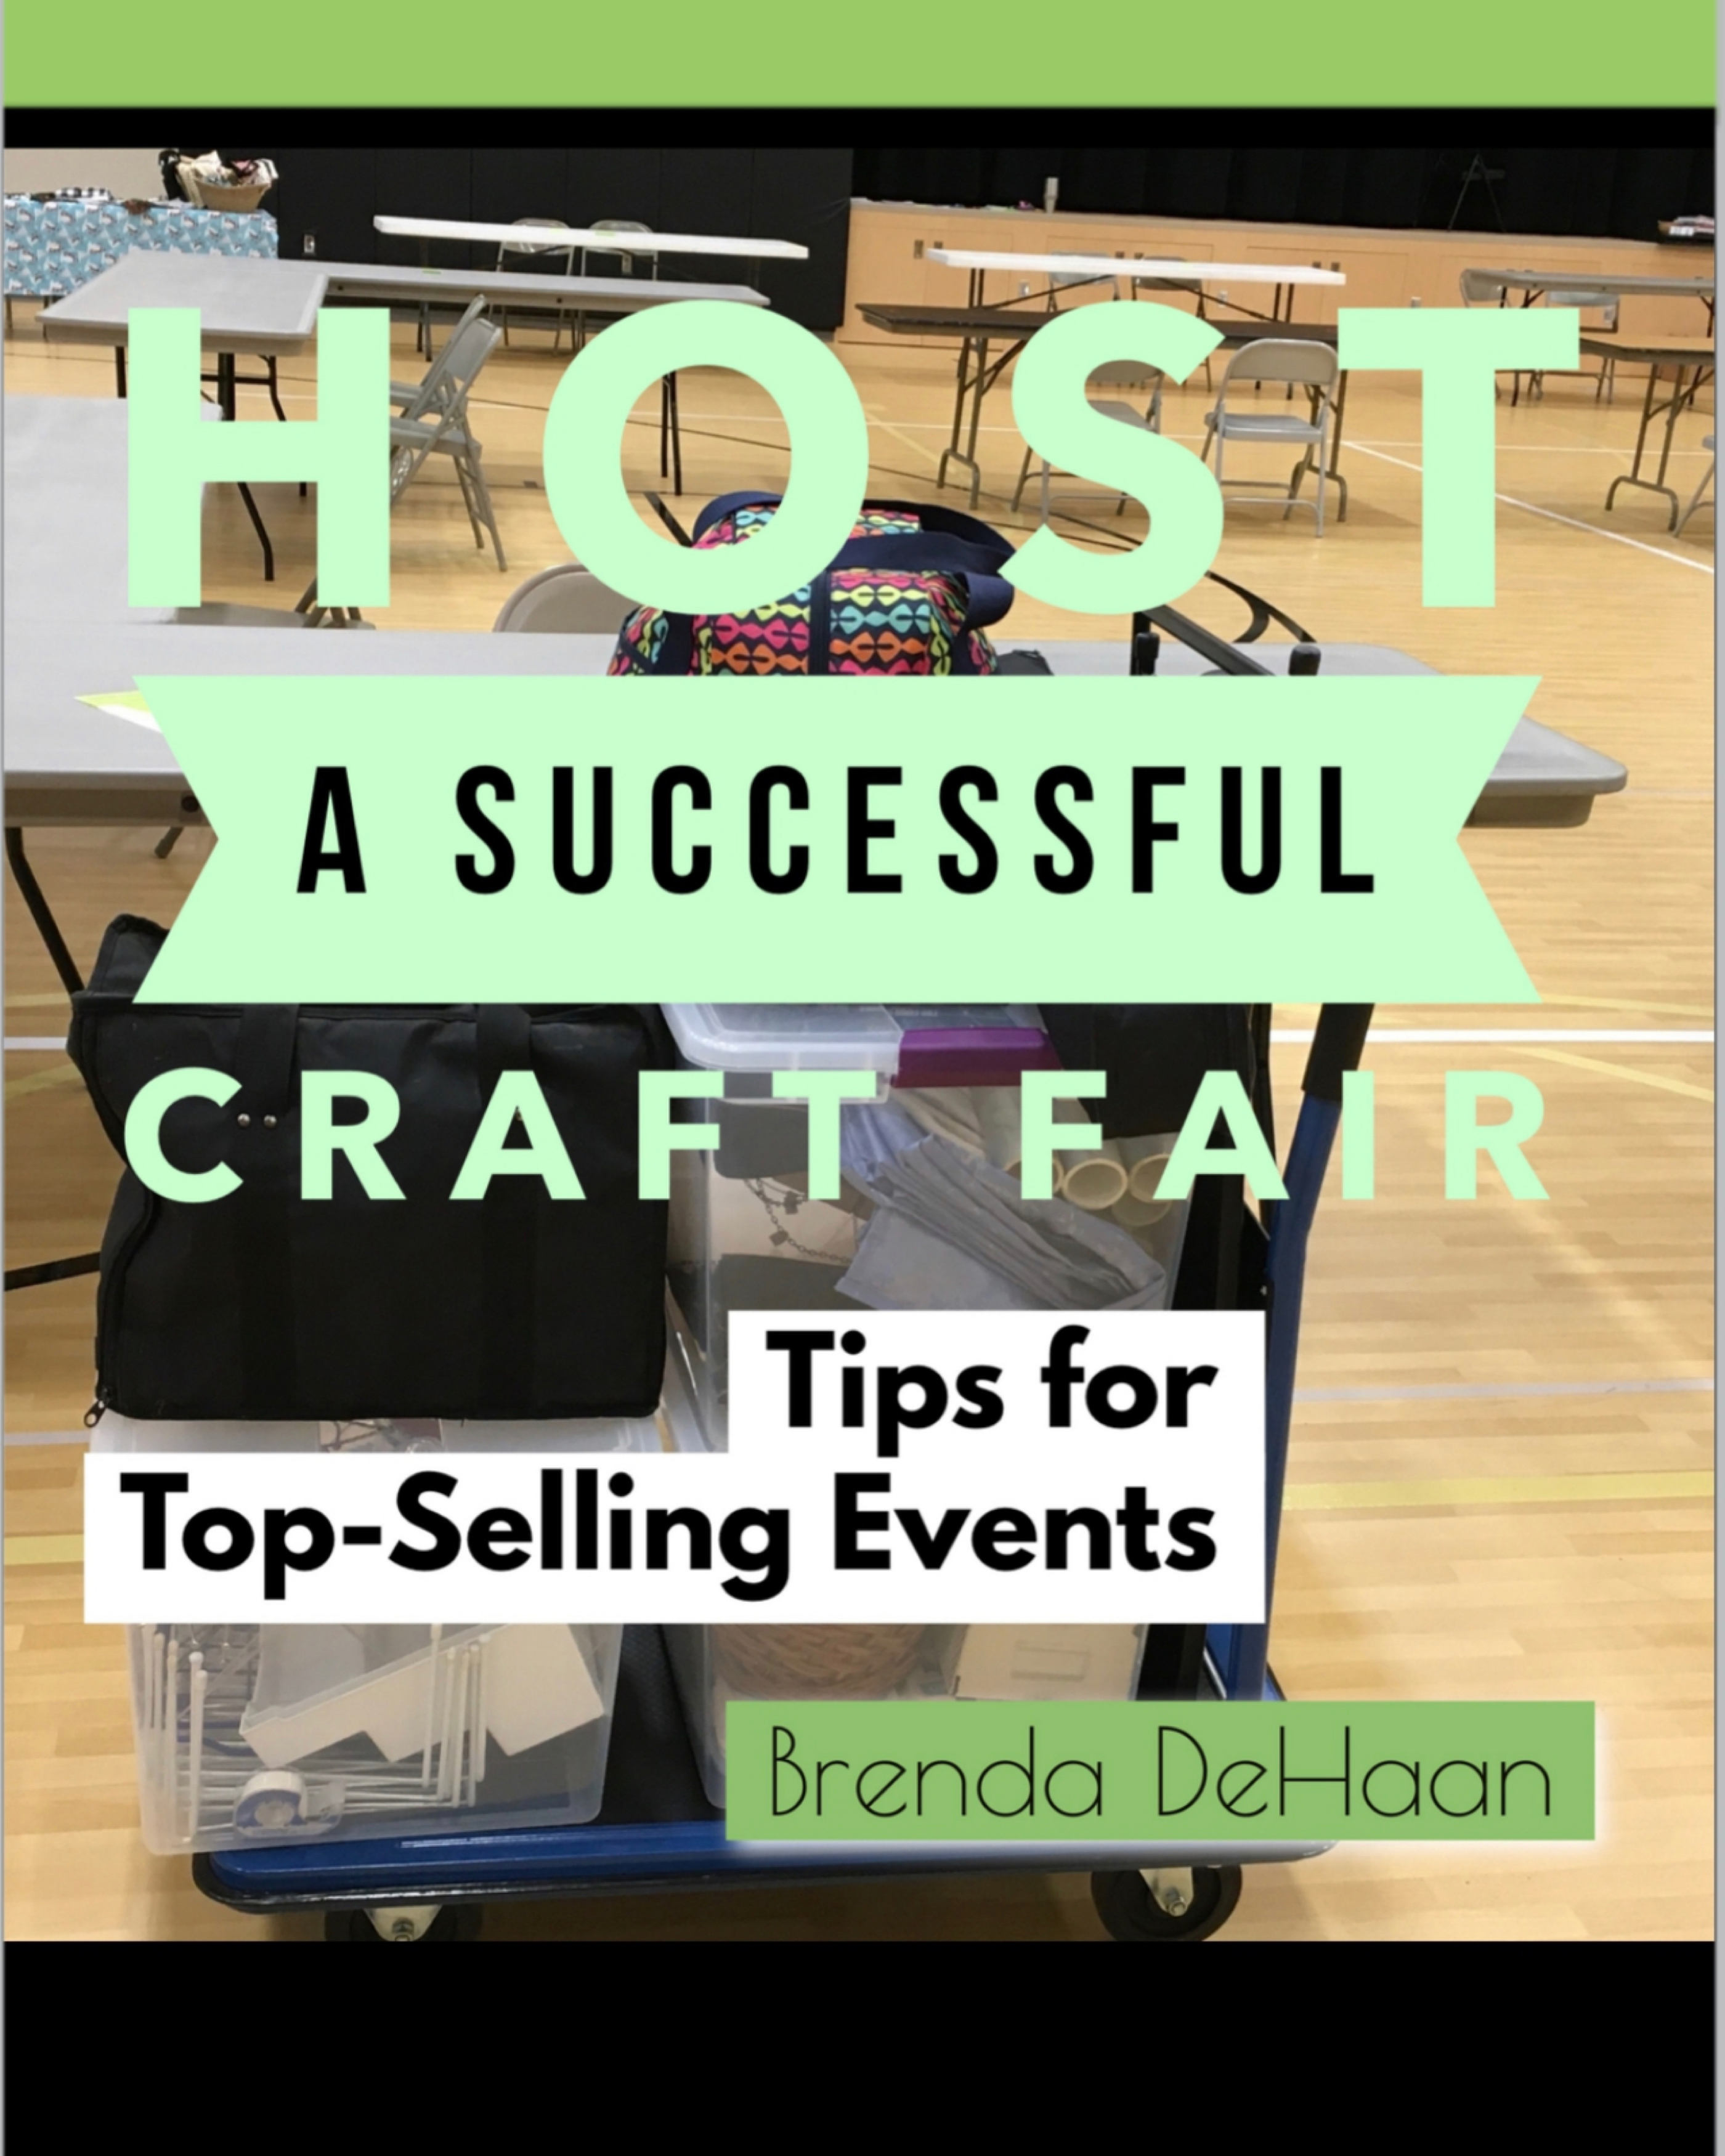 FREE: Host a Successful Craft Fair: Tips for Top-Selling Events by Brenda DeHaan